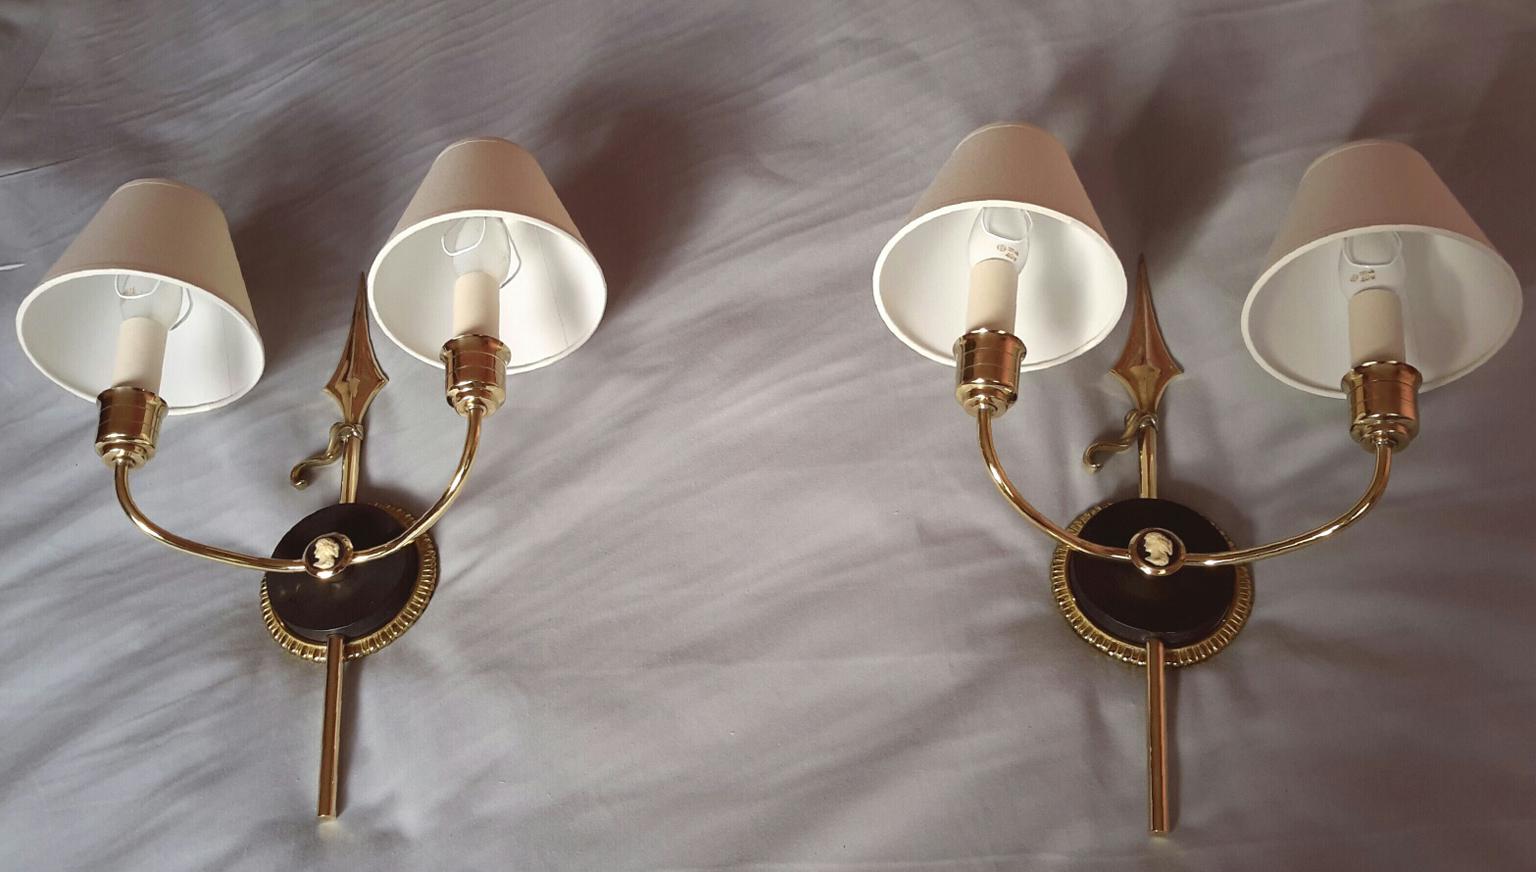 Lacquered Unique Neoclassical French Revolution Style Double Sconces, 1950s For Sale